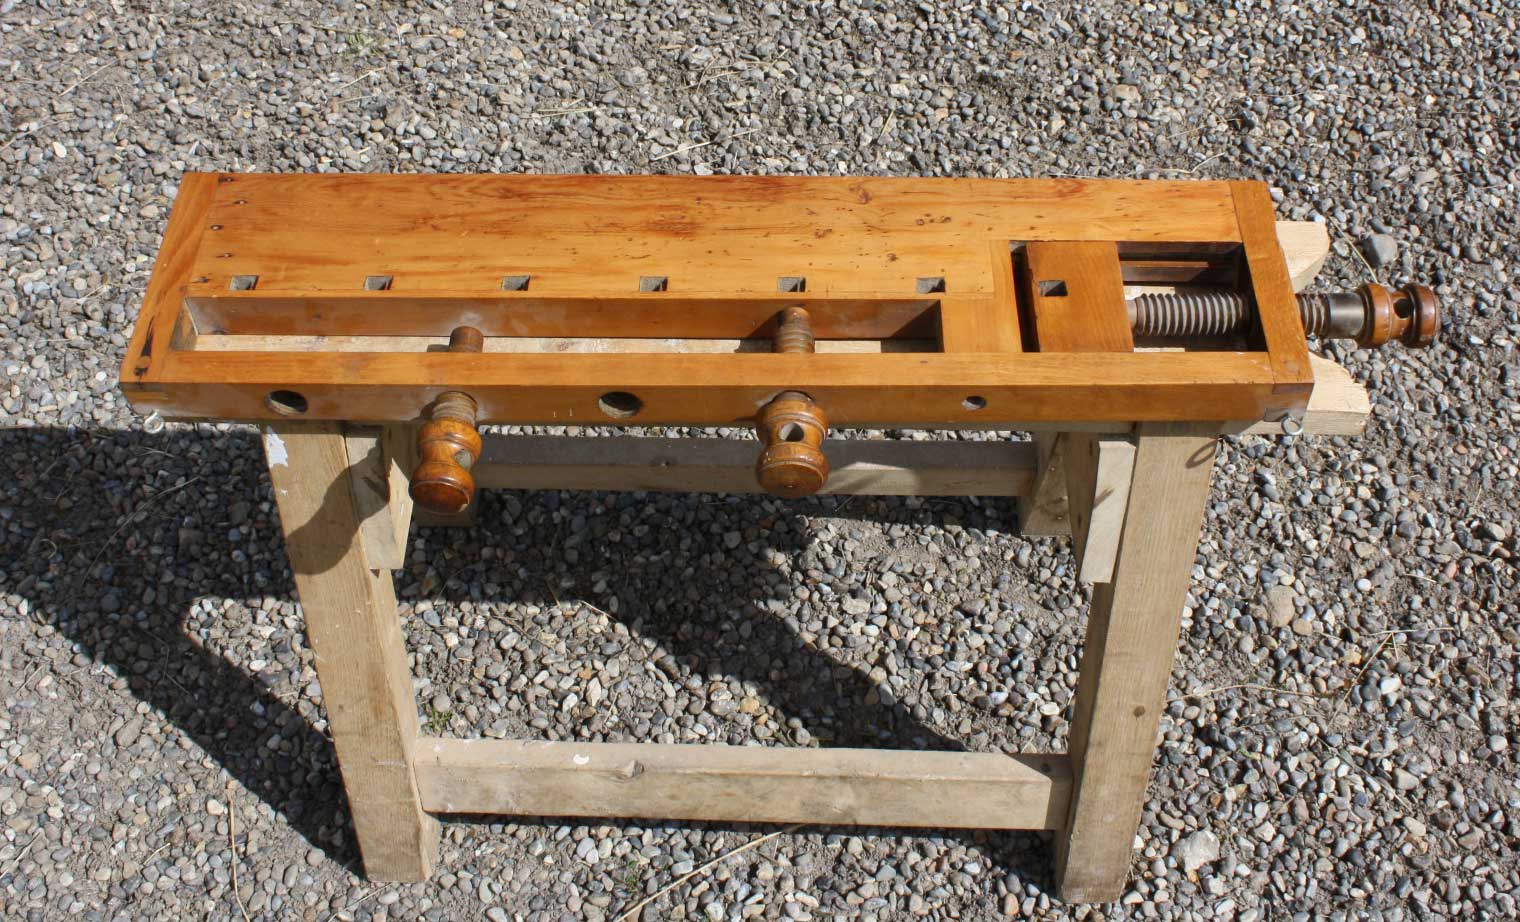 Instructions for a Tiny Workbench